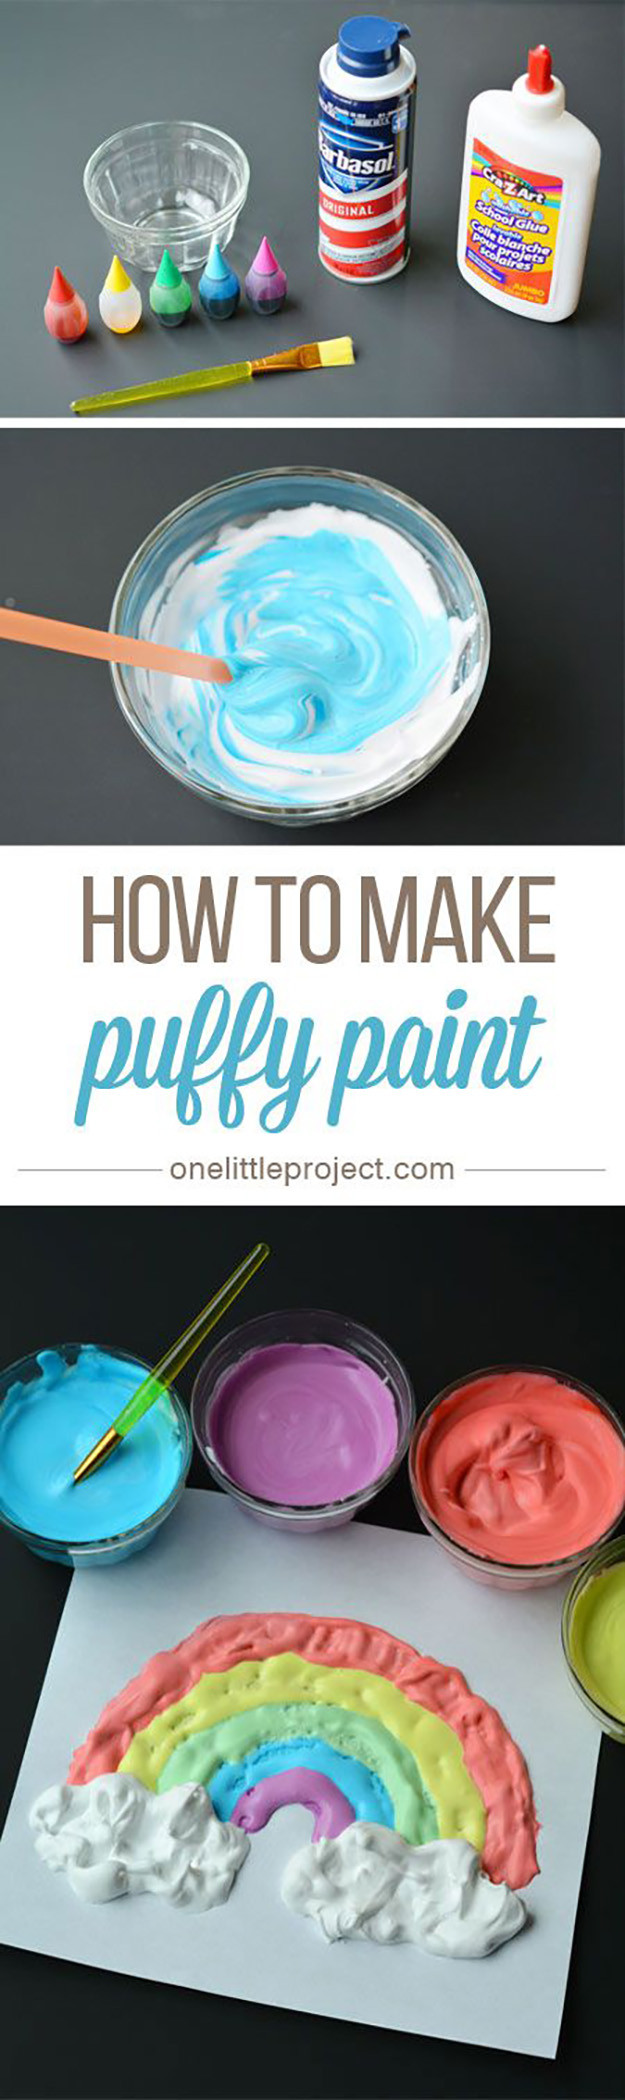 Fun DIY Crafts For Kids
 21 Easy DIY Paint Recipes Your Kids Will Go Crazy For